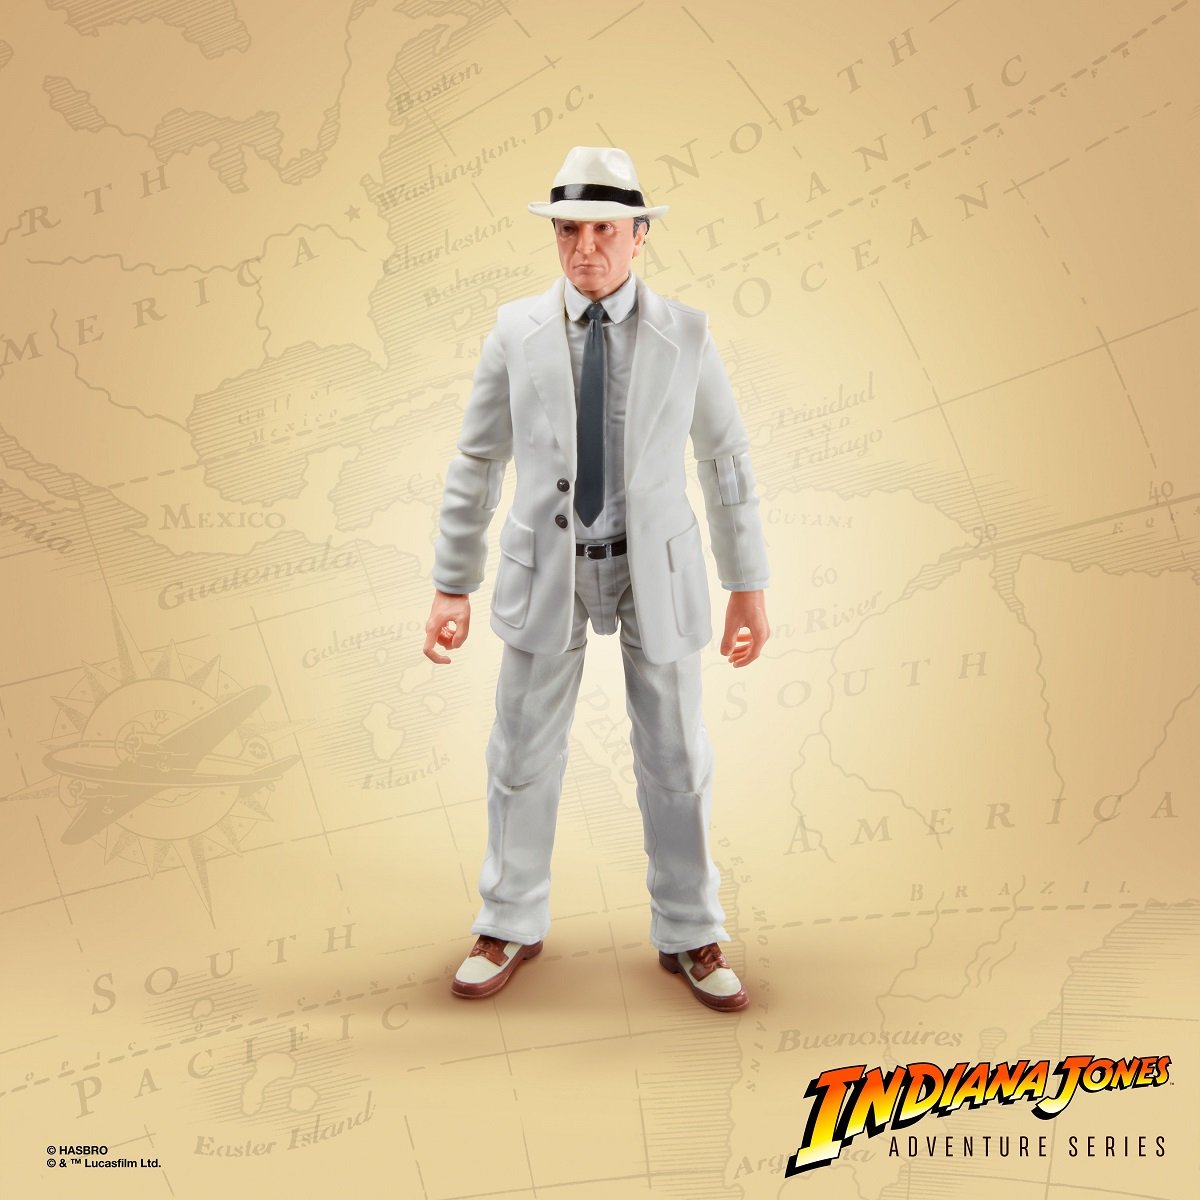 René Emile Belloq action figure from the Indiana Jones Adventure series from Hasbro.